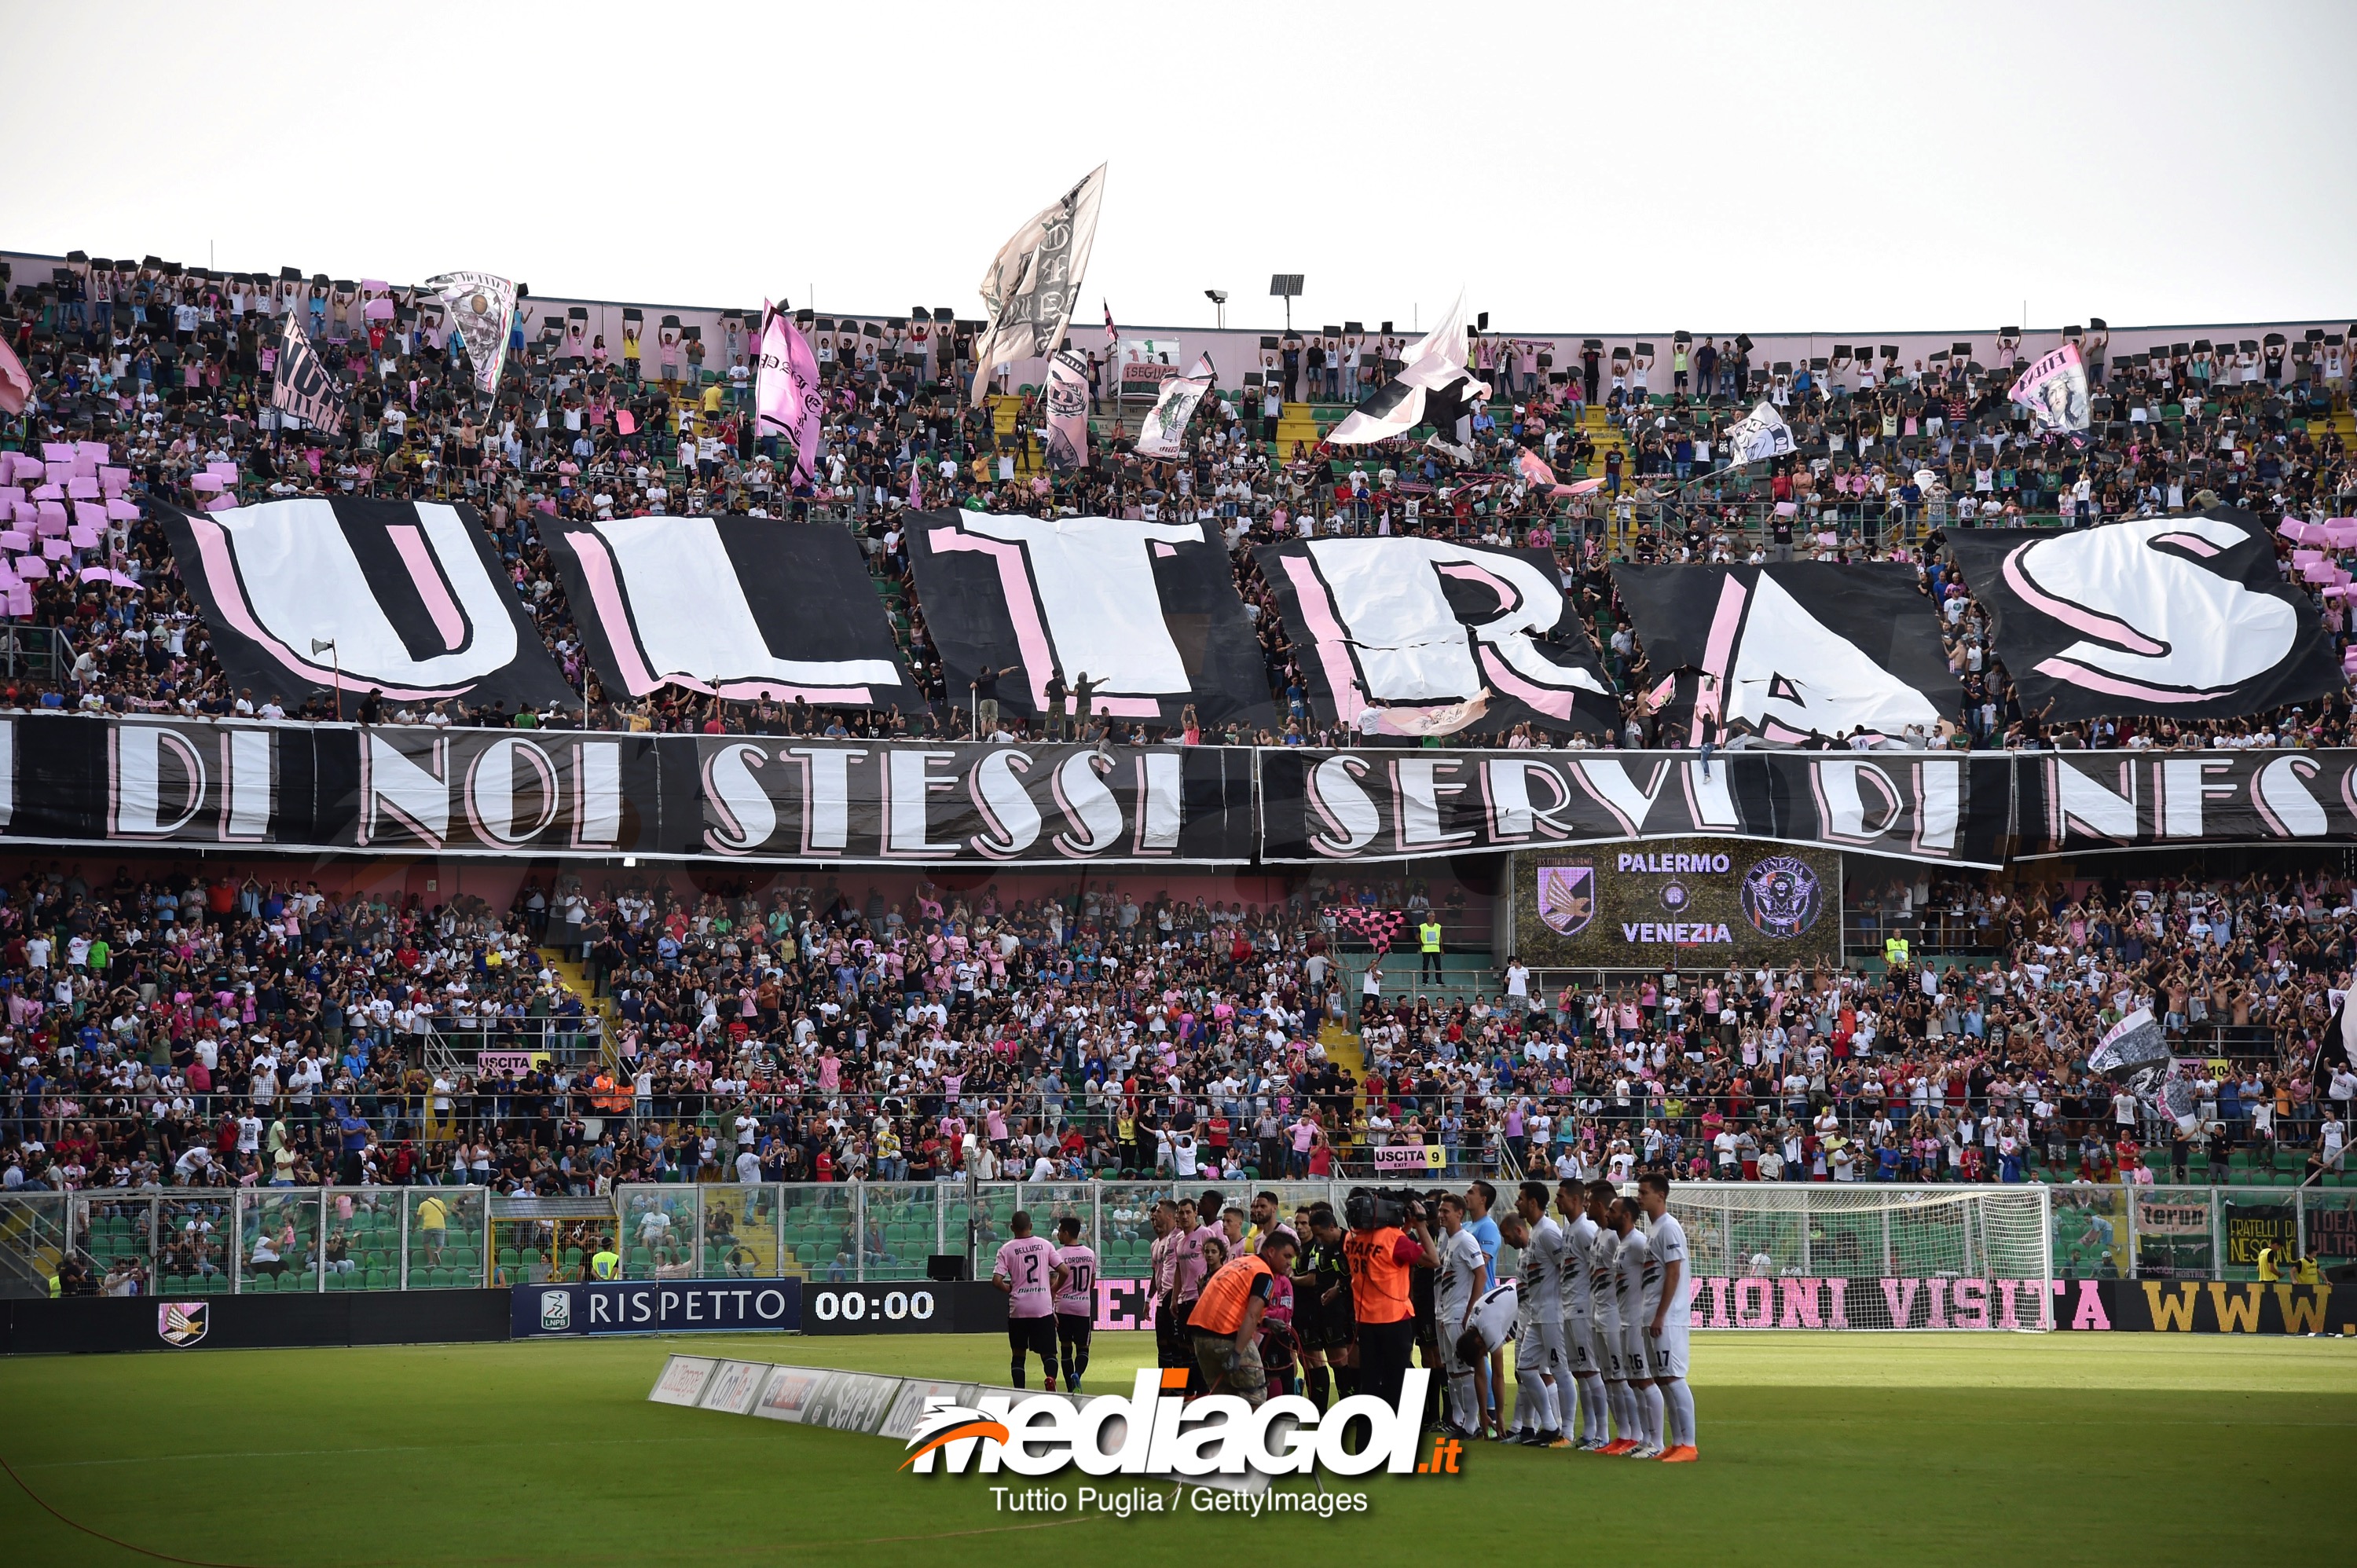 PALERMO, ITALY - JUNE 10: Fans of Palermo show their support during the serie B playoff match between US Citta di Palermo and Venezia FC at Stadio Renzo Barbera on June 10, 2018 in Palermo, Italy.  (Photo by Tullio M. Puglia/Getty Images)